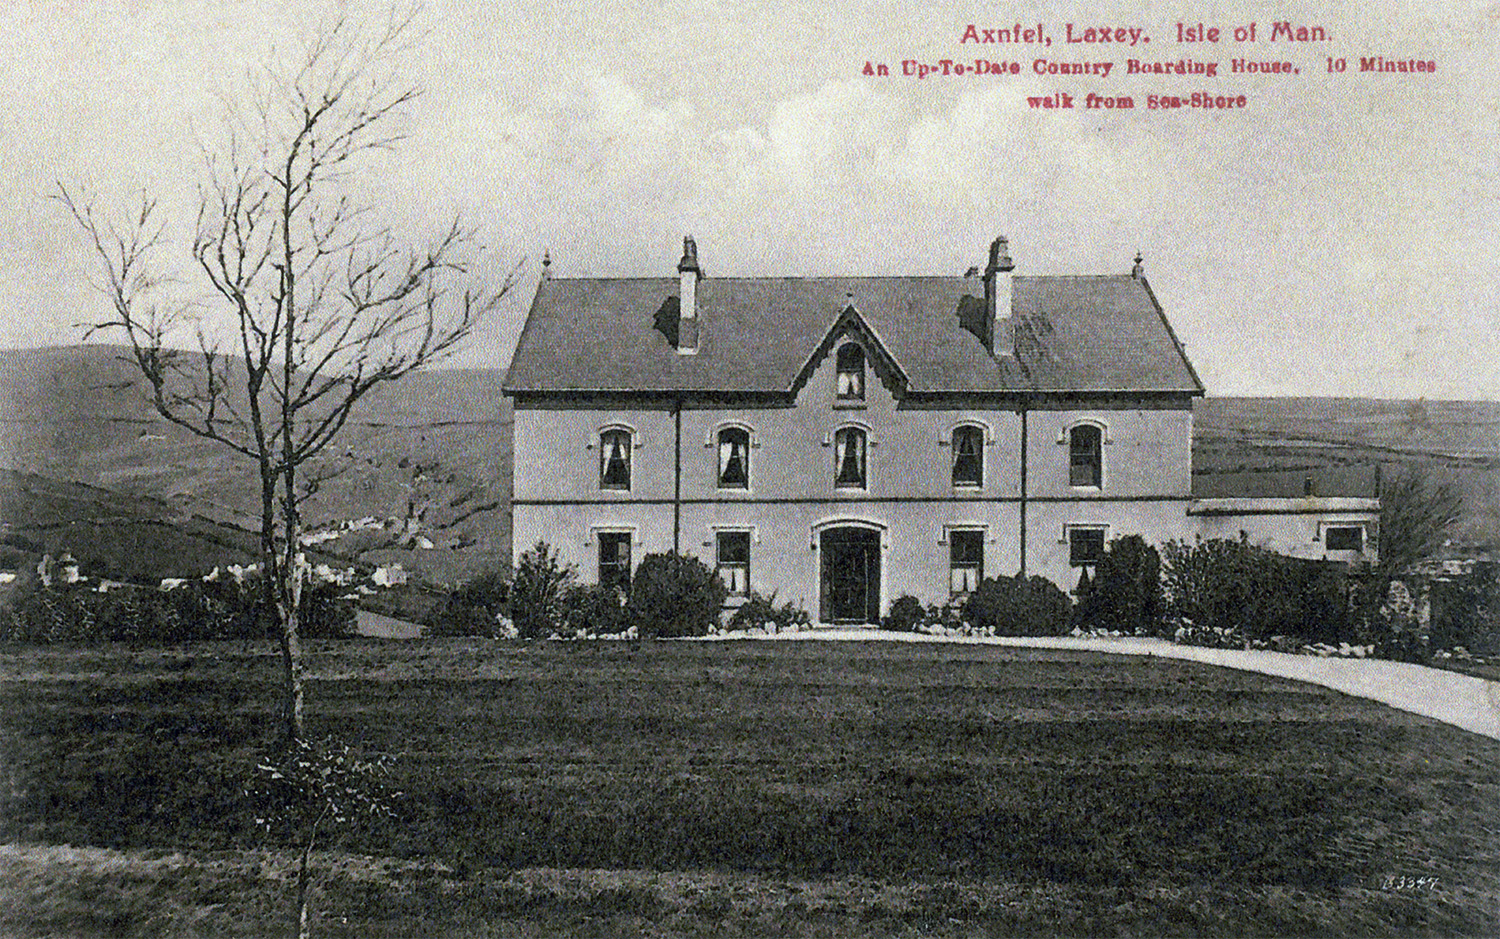 The Axnfell Guest House, shortly after being opened in the early 1900's by the Glover family.